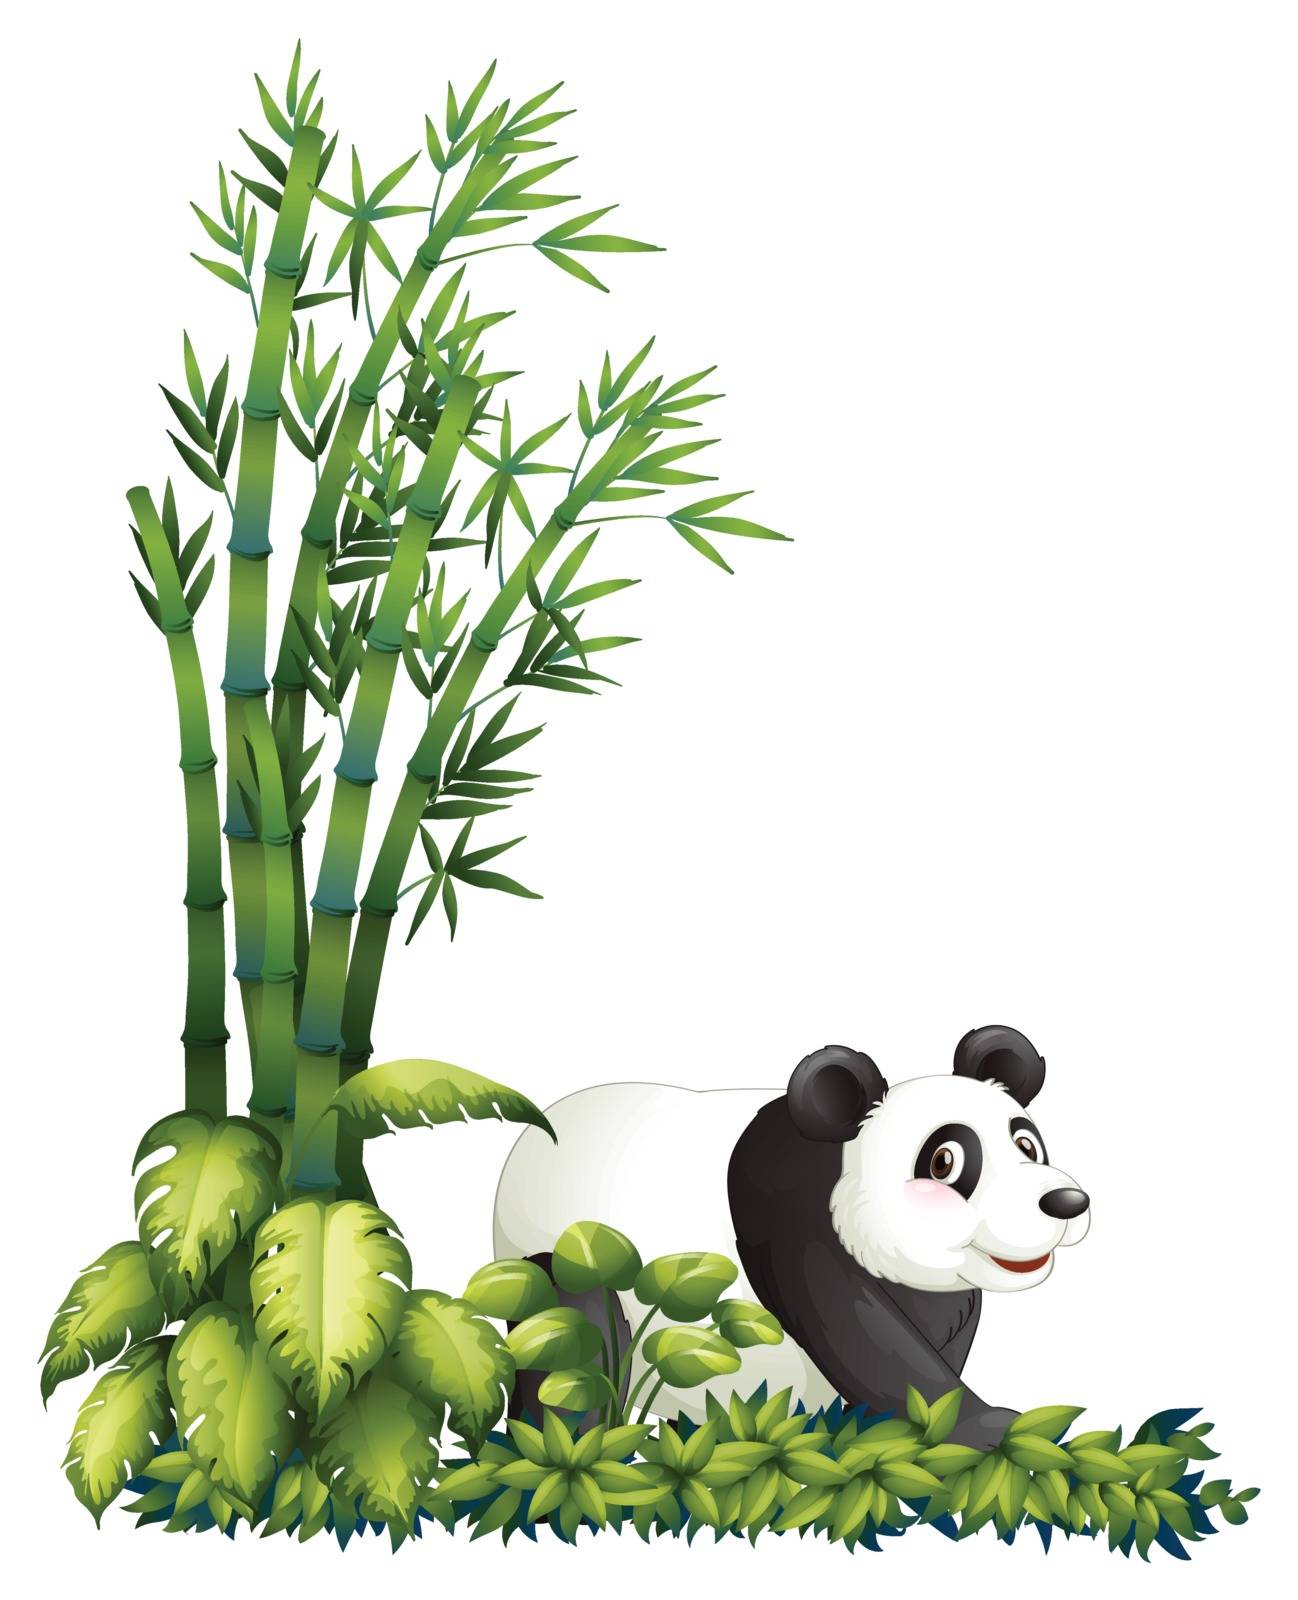 Illustration of a panda hiding on a white background